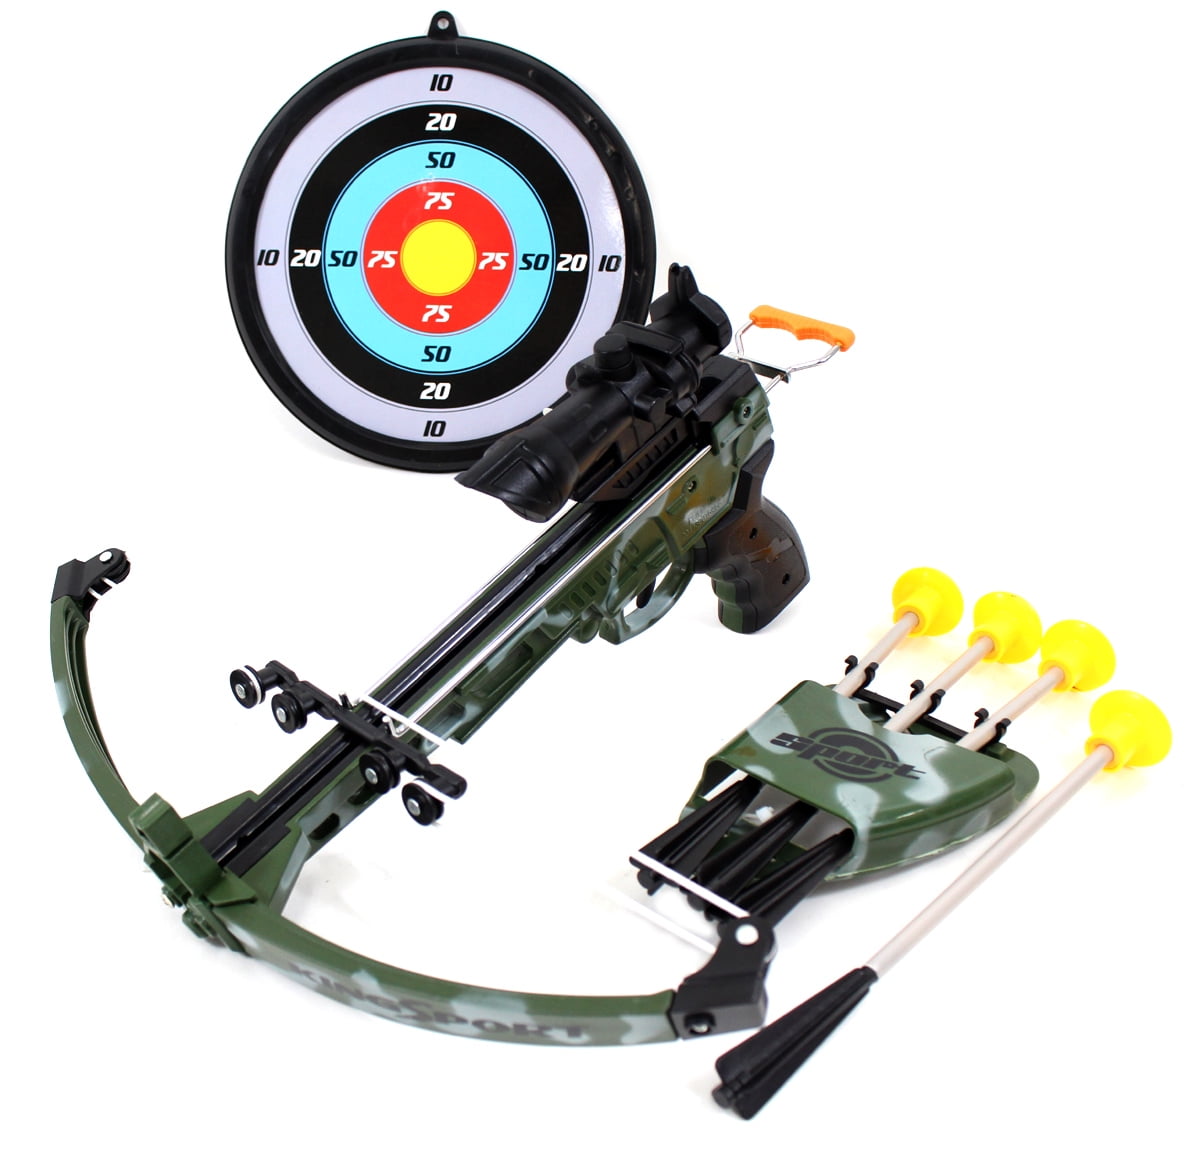 Archery Target Practice Toy for Teens and 3 Foam Suction Cup Projectiles Target NXT Generation Orange Blaze Tactical Crossbow